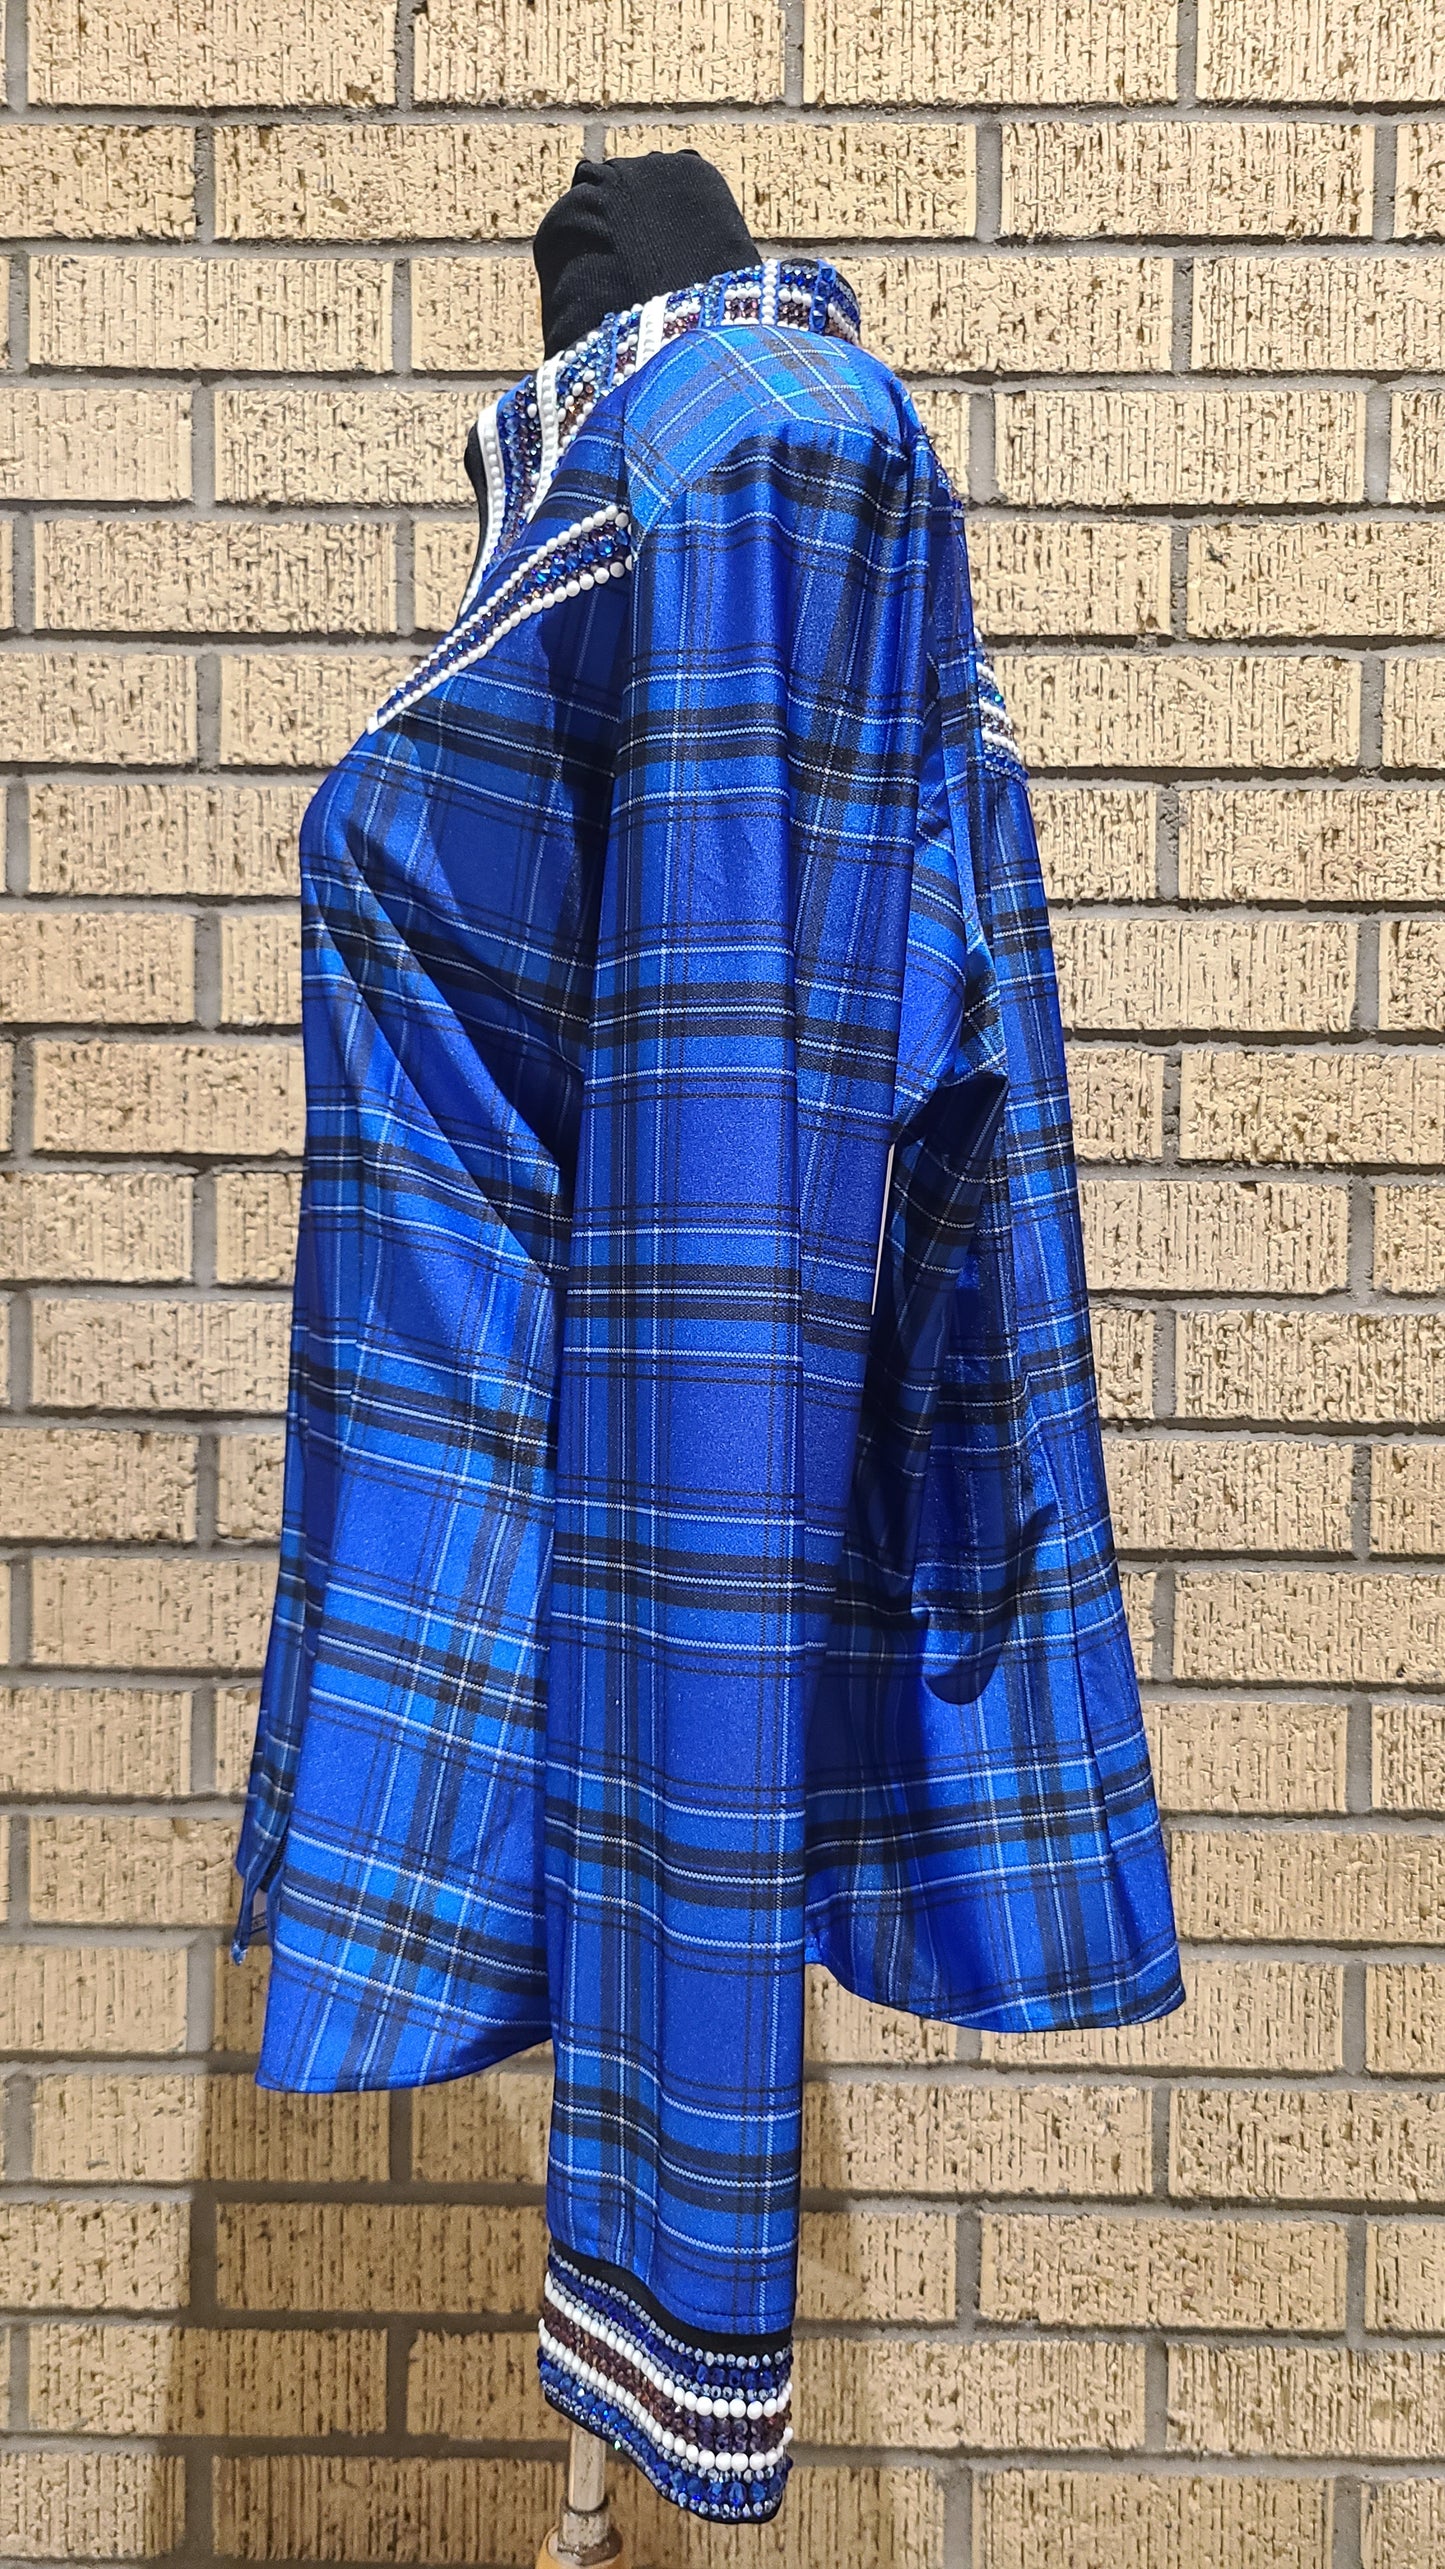 XL Blue and Black Plaid Day Shirt stretch with white